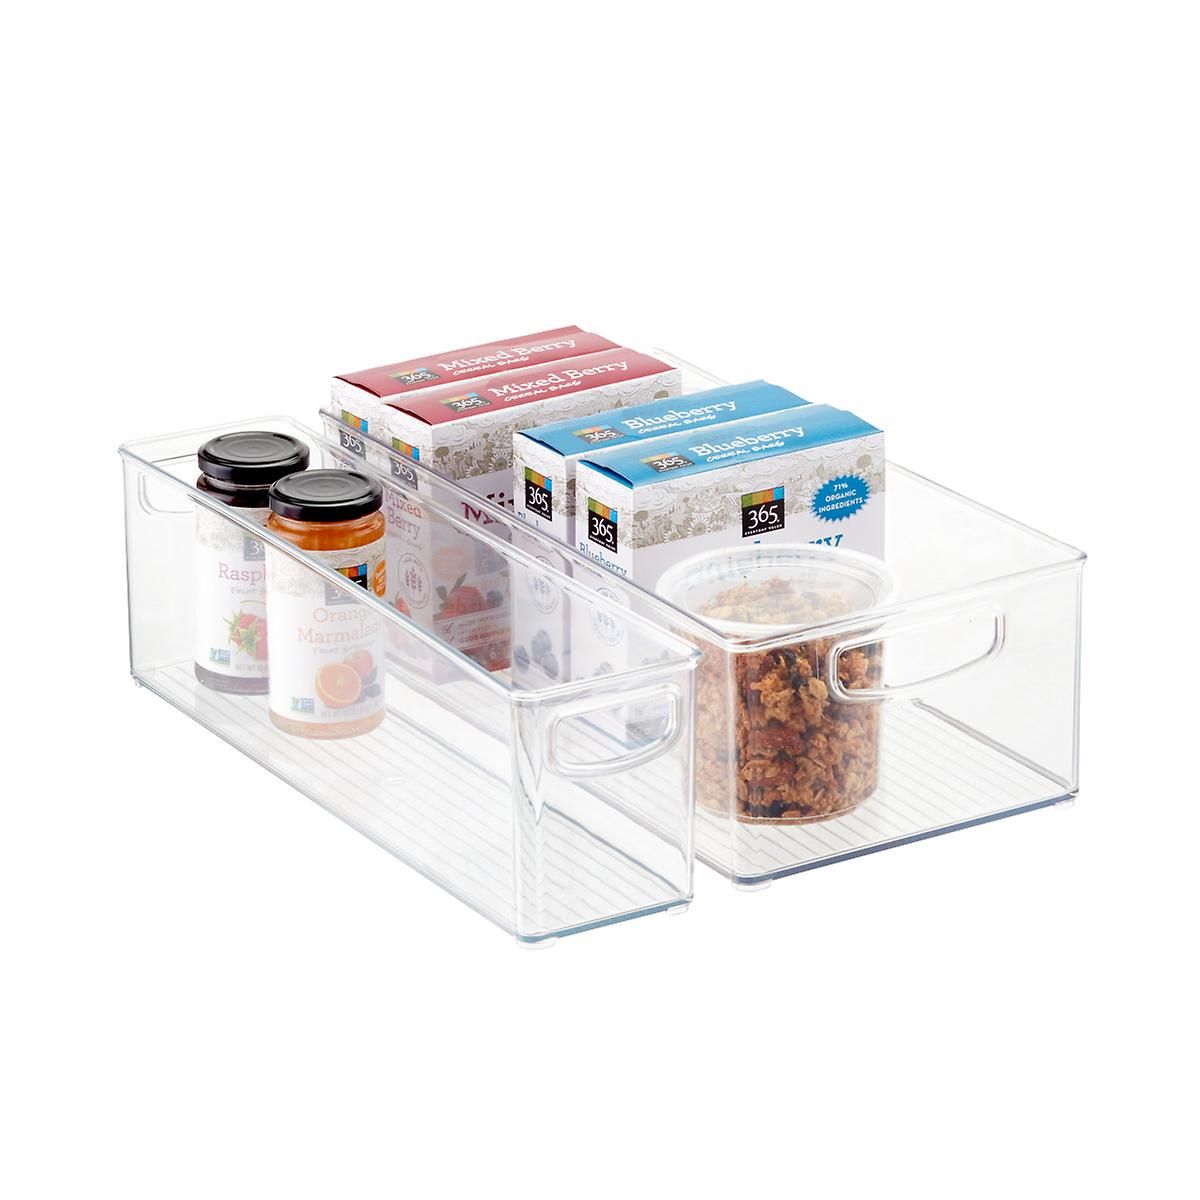 iDesign Linus Deep Drawer Bins | The Container Store